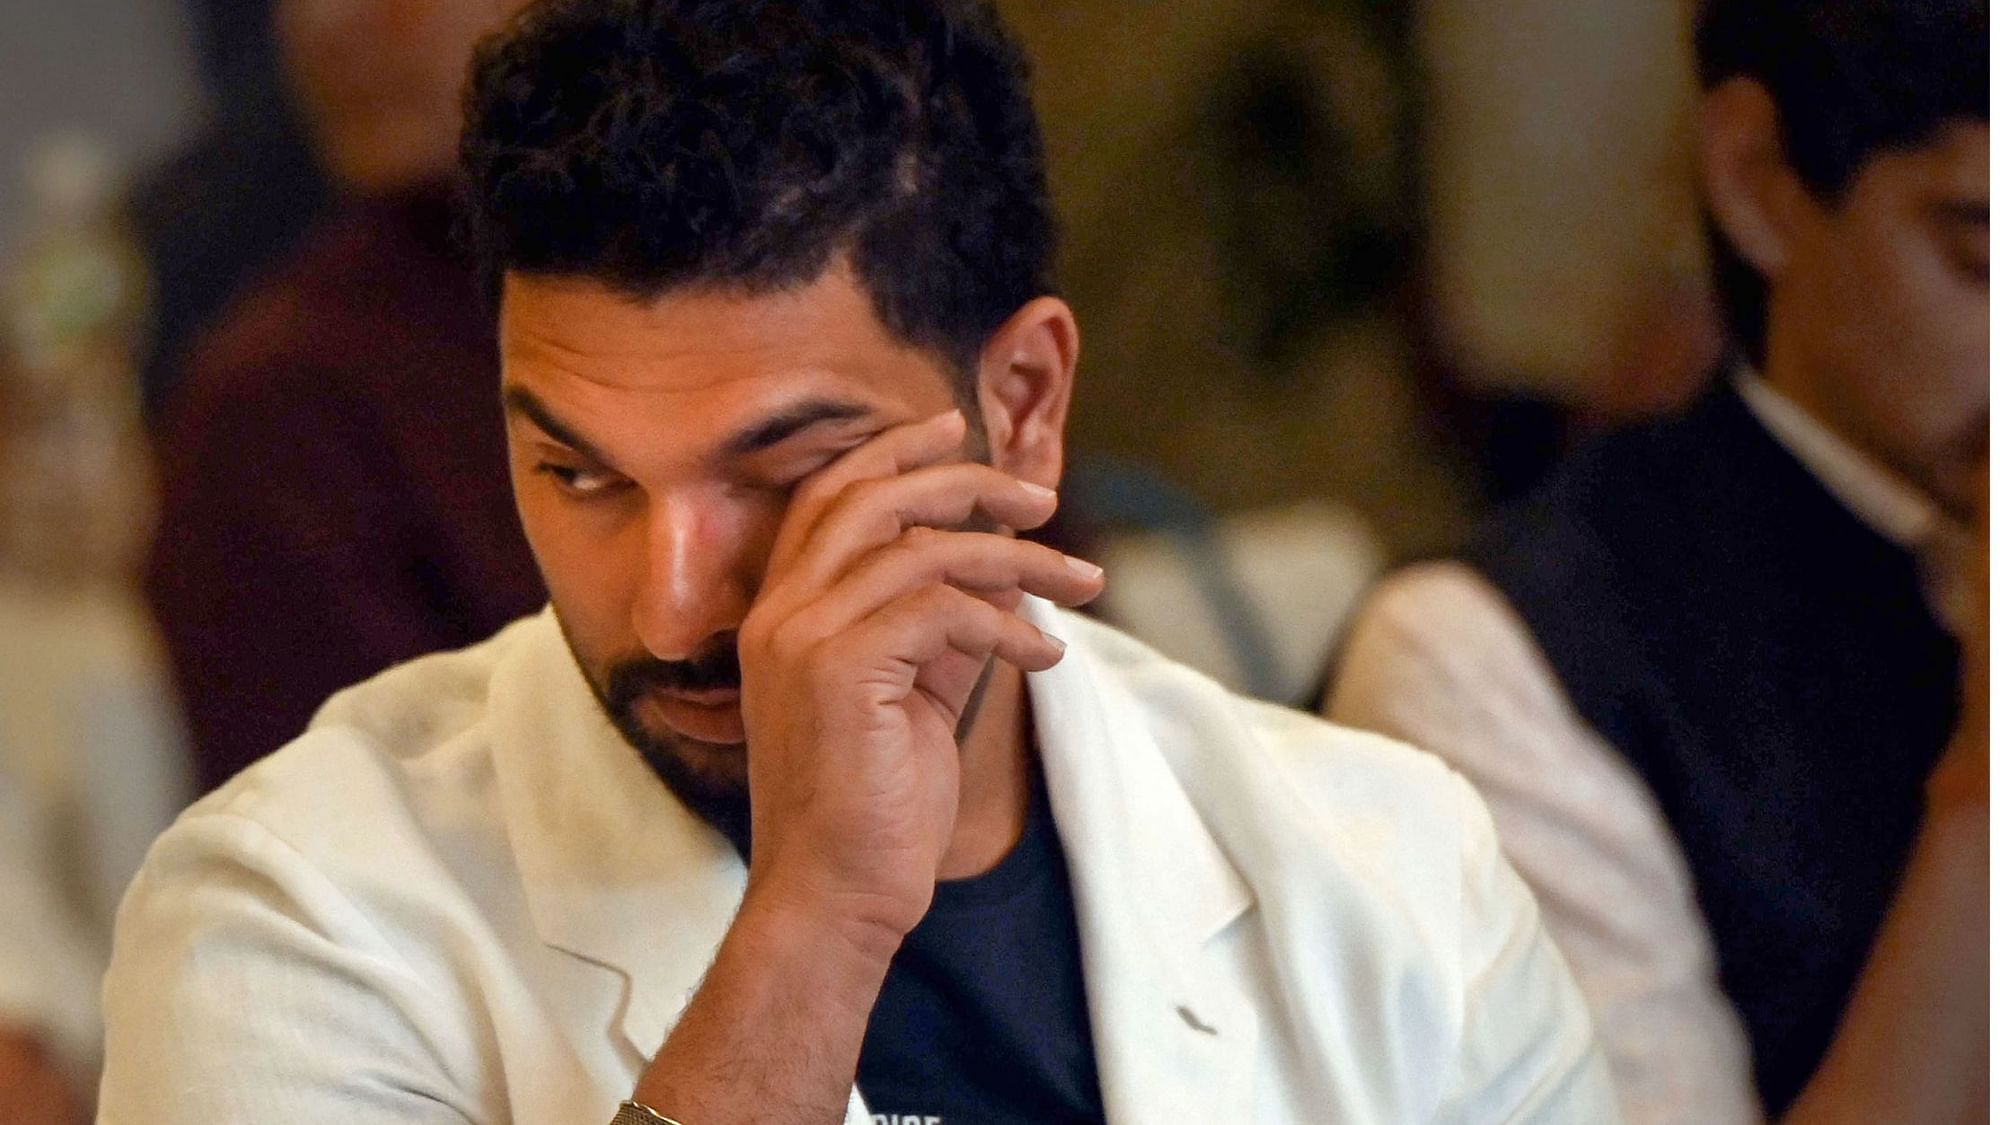 Here are some of the revelations made by Yuvraj Singh in his retirement press conference.